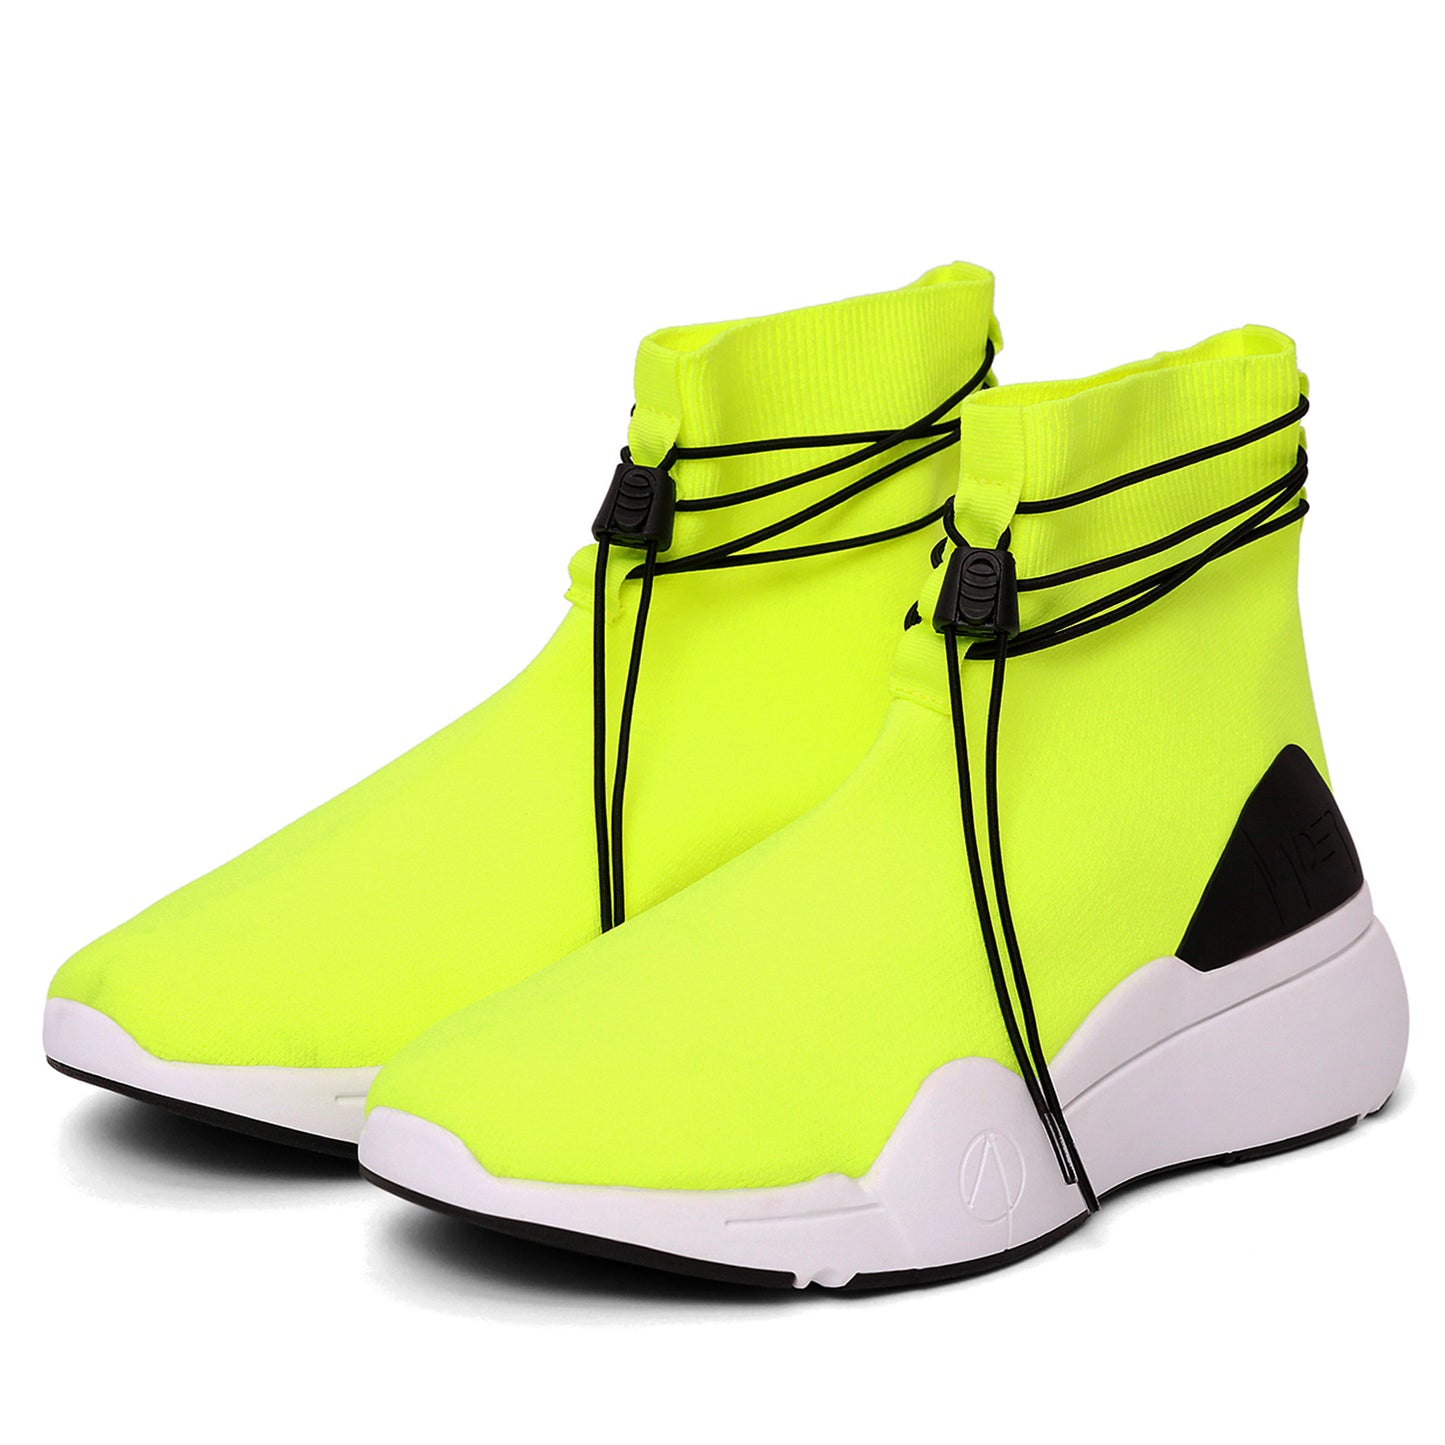 ELLIPSIS SOCK TRAINER IN NEON, BLACK AND WHITE